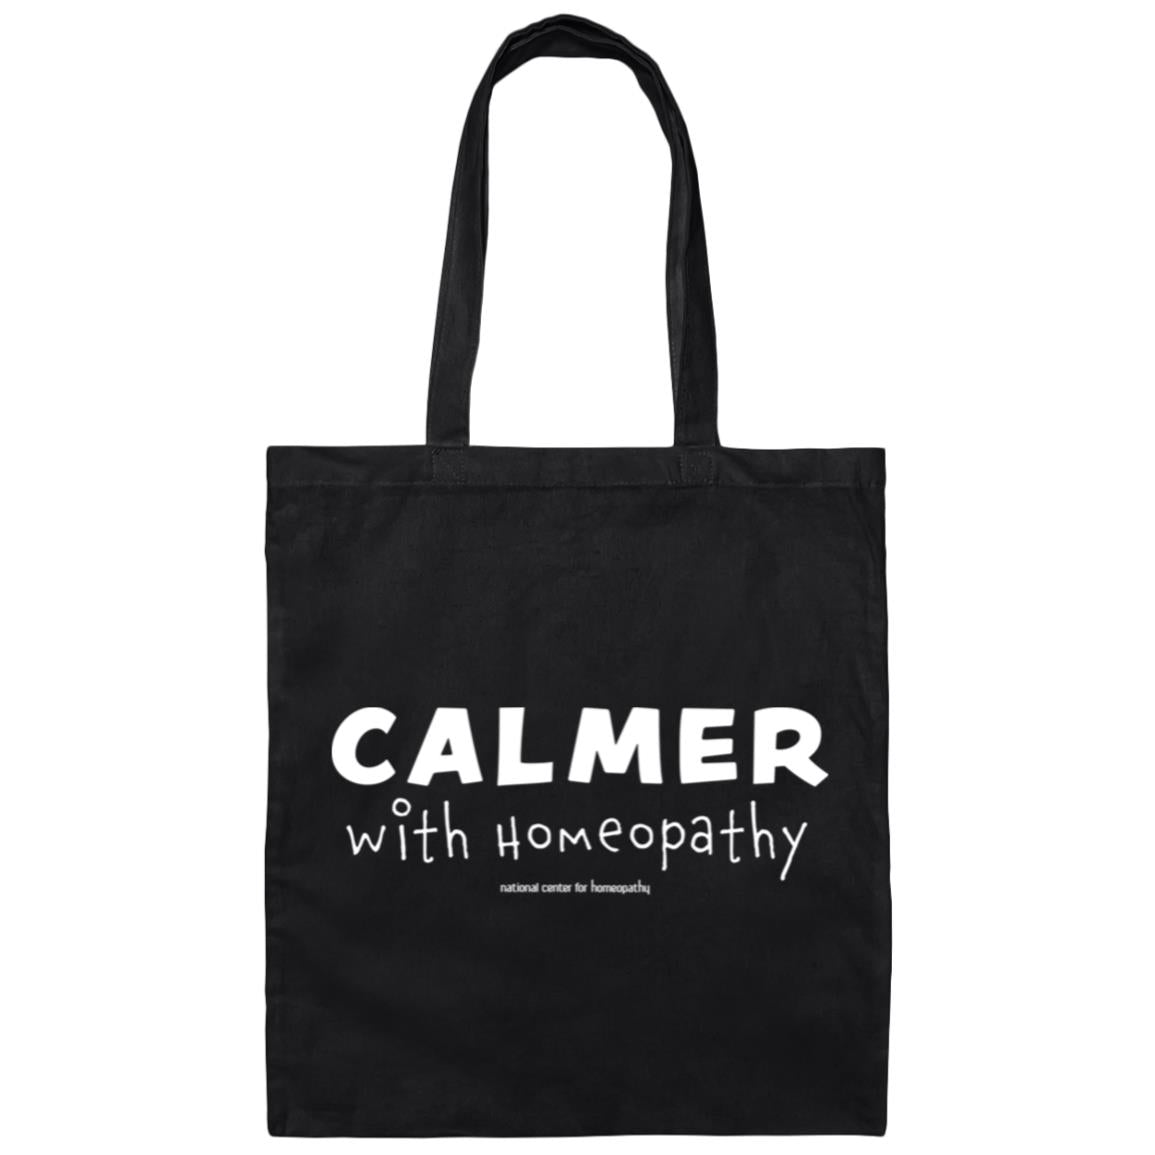 Calmer with Homeopathy Canvas Tote Bag - Multiple Colors